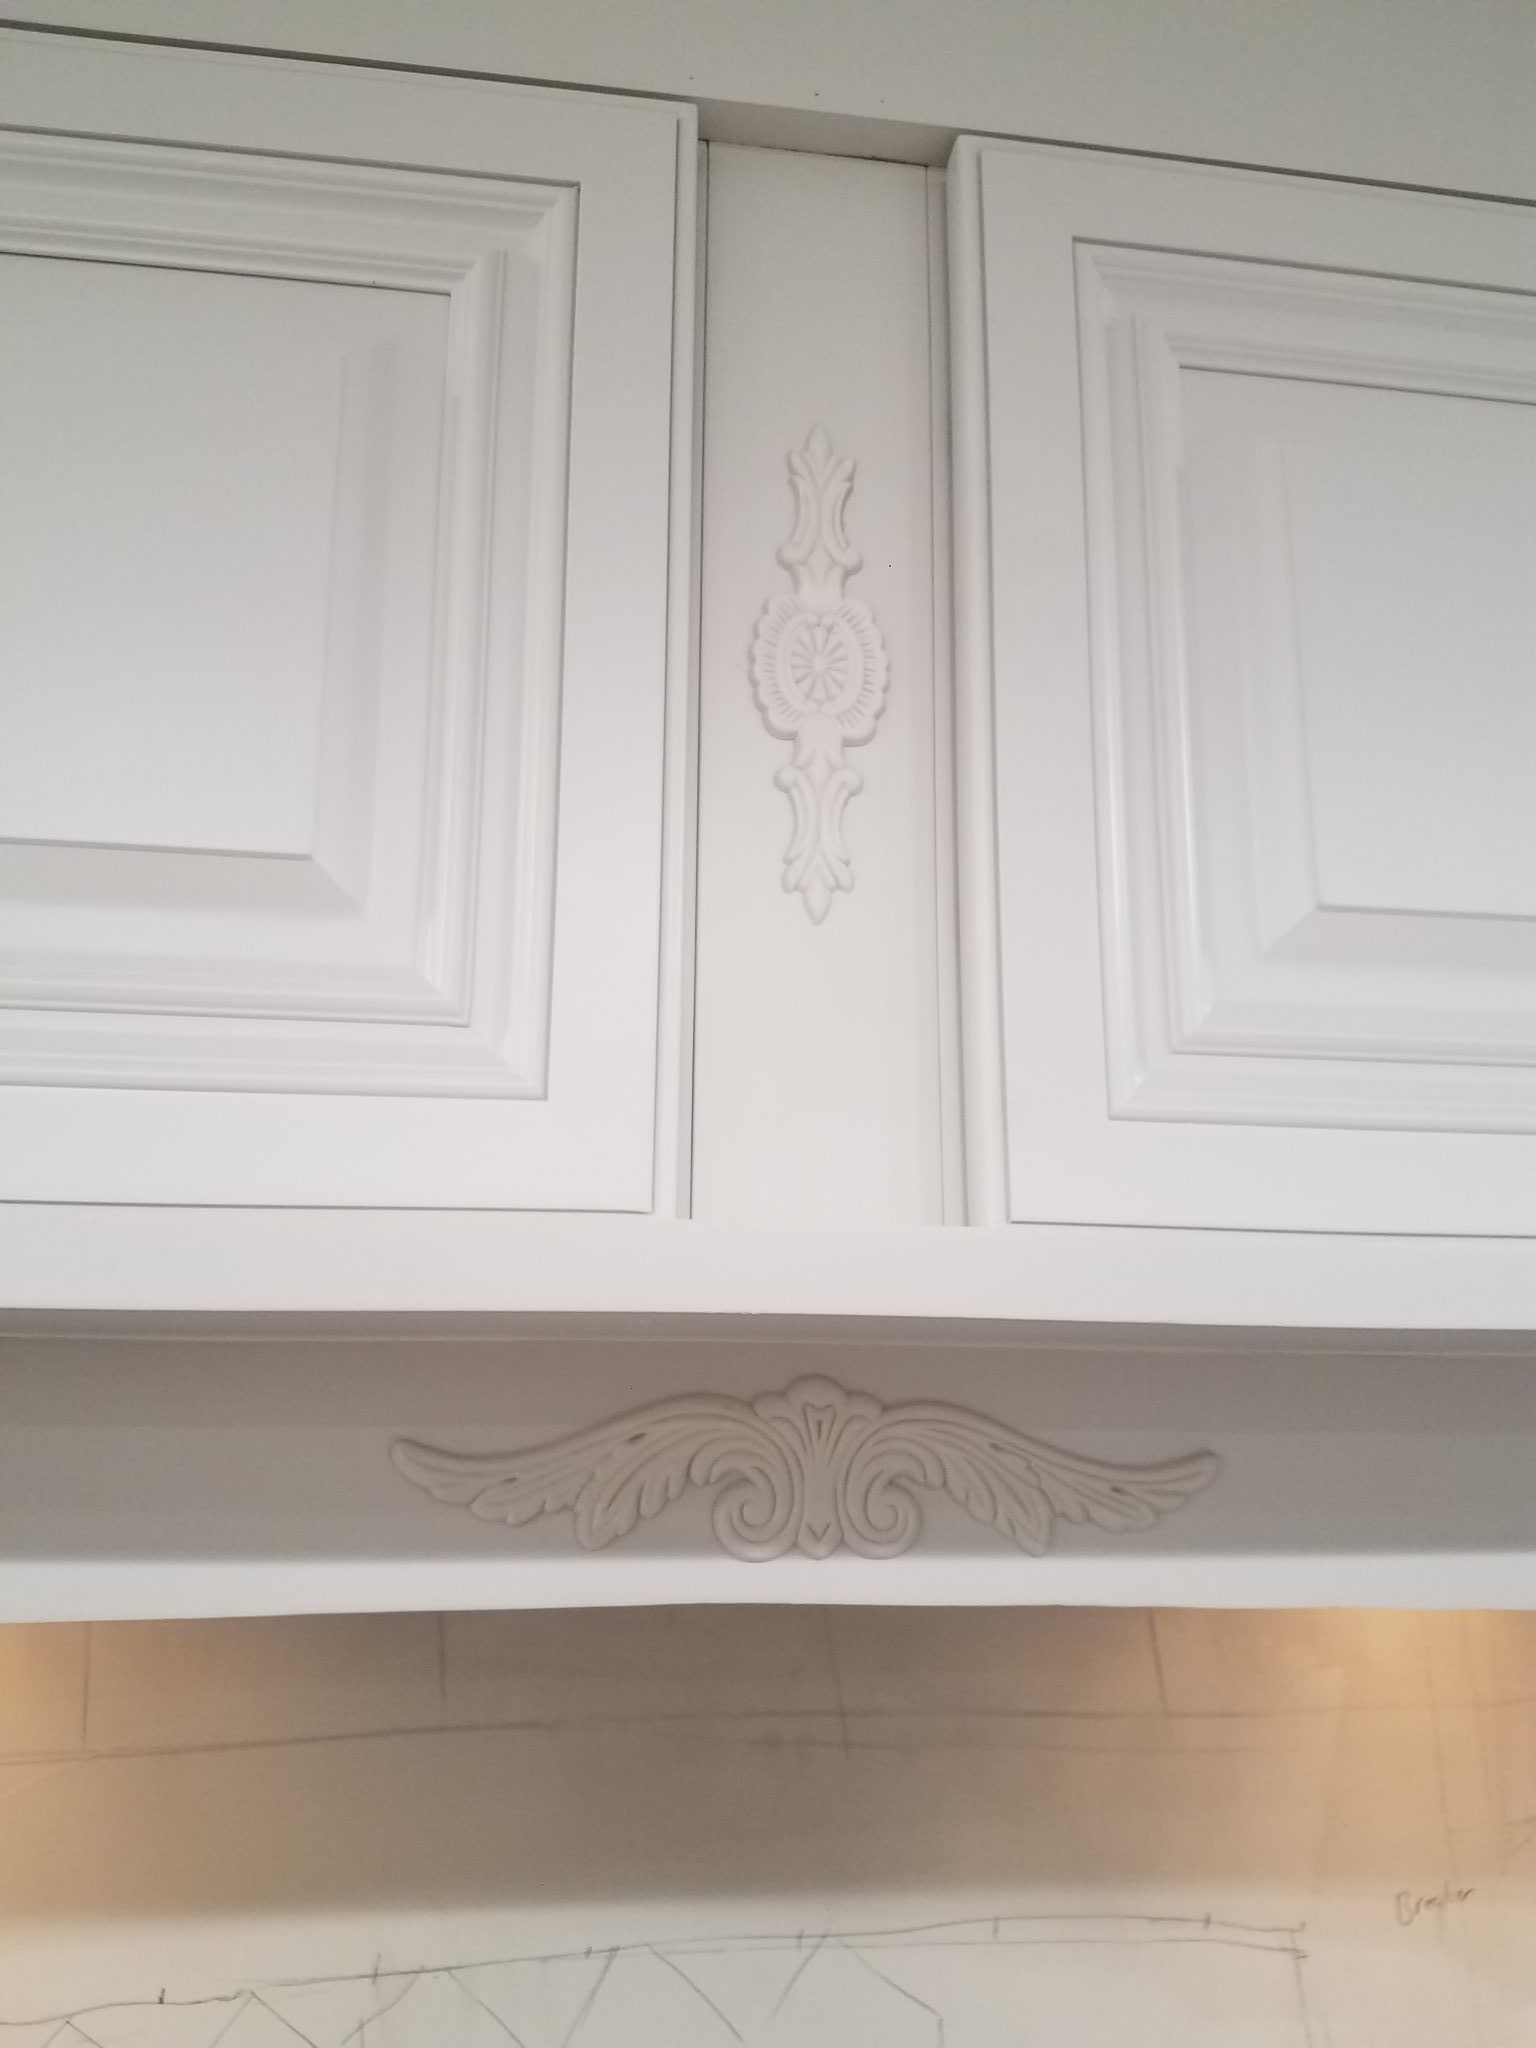 Custom Stove Mantels with Recessed Vents